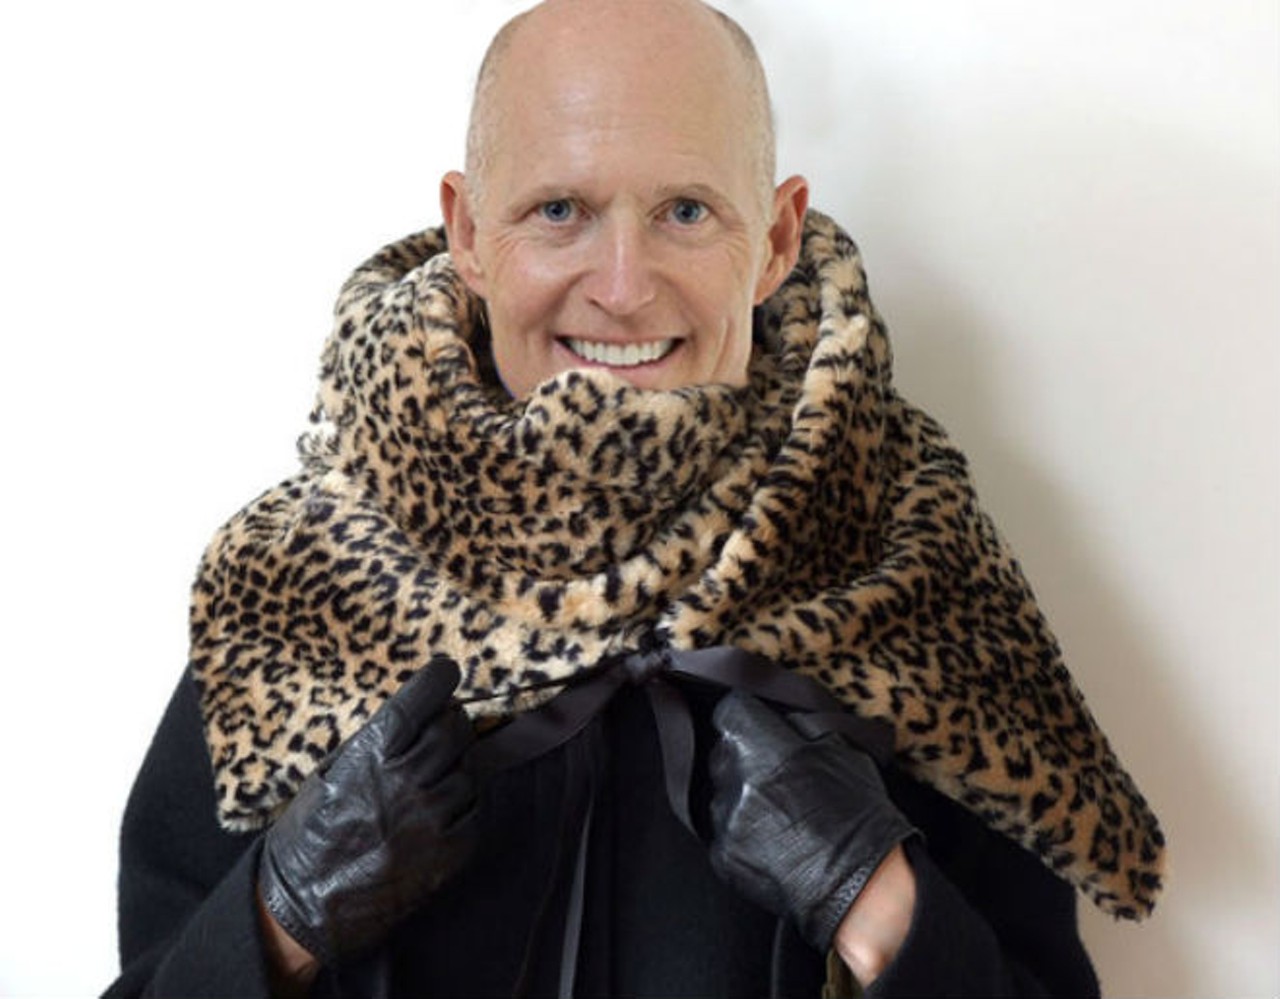 Rick Scott draped in a Florida panther skin
Since the state of Florida is trying it's hardest to remove our state animal, the panther, from the federally protected endangered species list why not fully embrace this idiocy by going out as our governor in a fabulous panther shawl? Or...